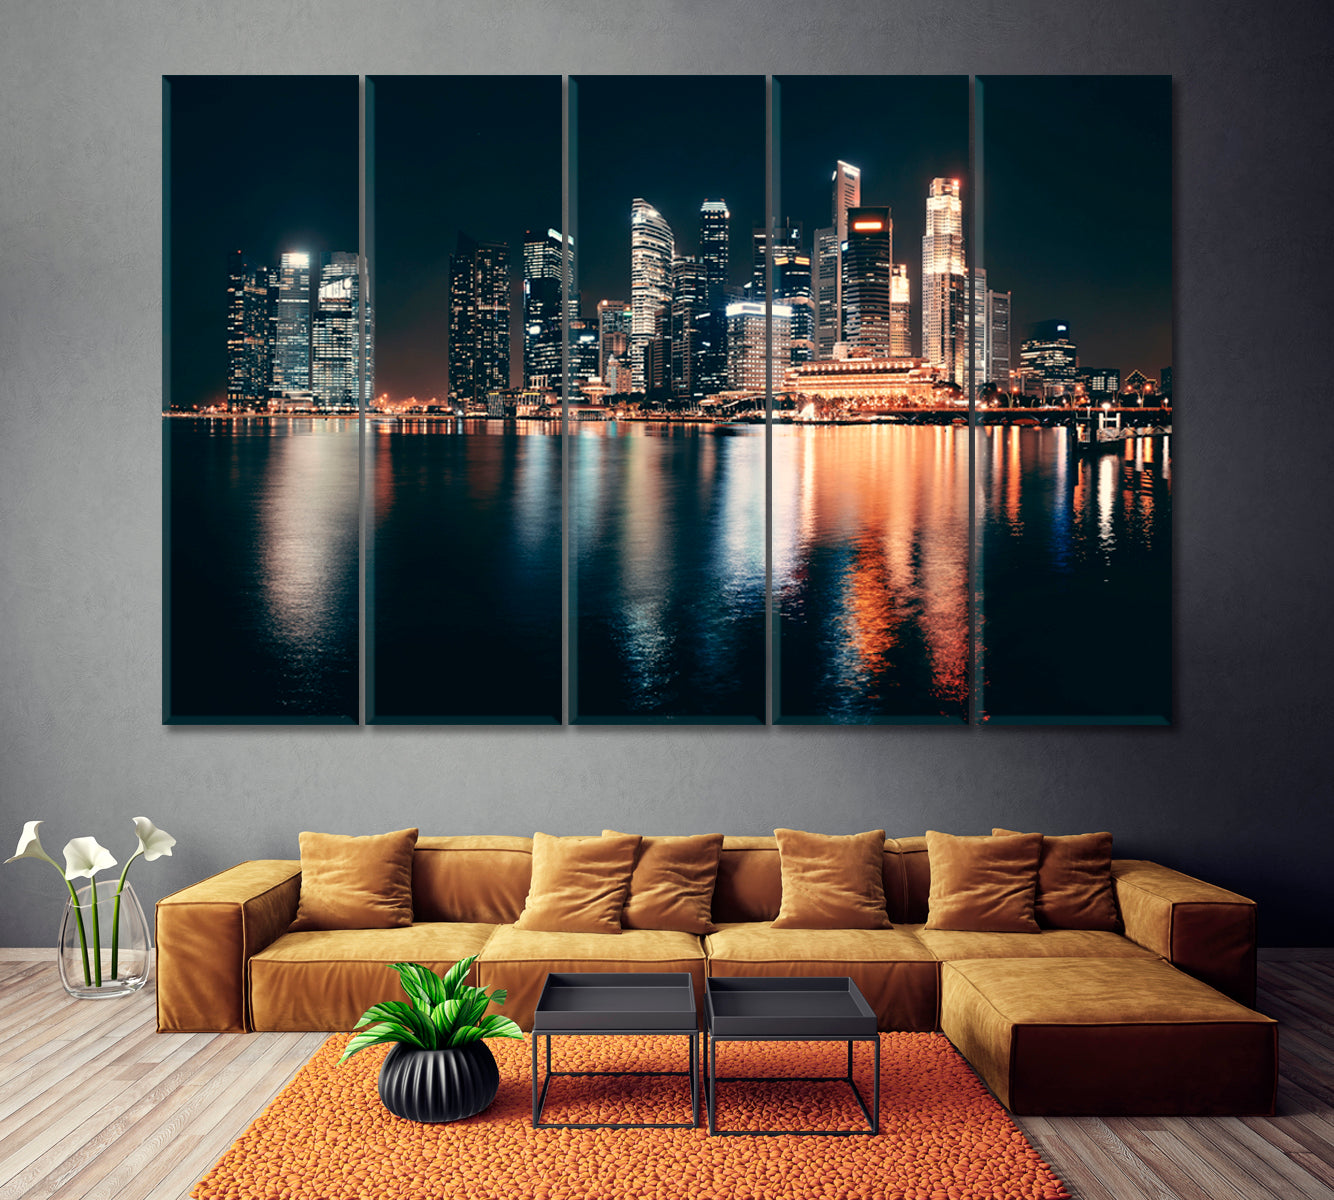 Singapore Skyline at Night Canvas Print ArtLexy 5 Panels 36"x24" inches 